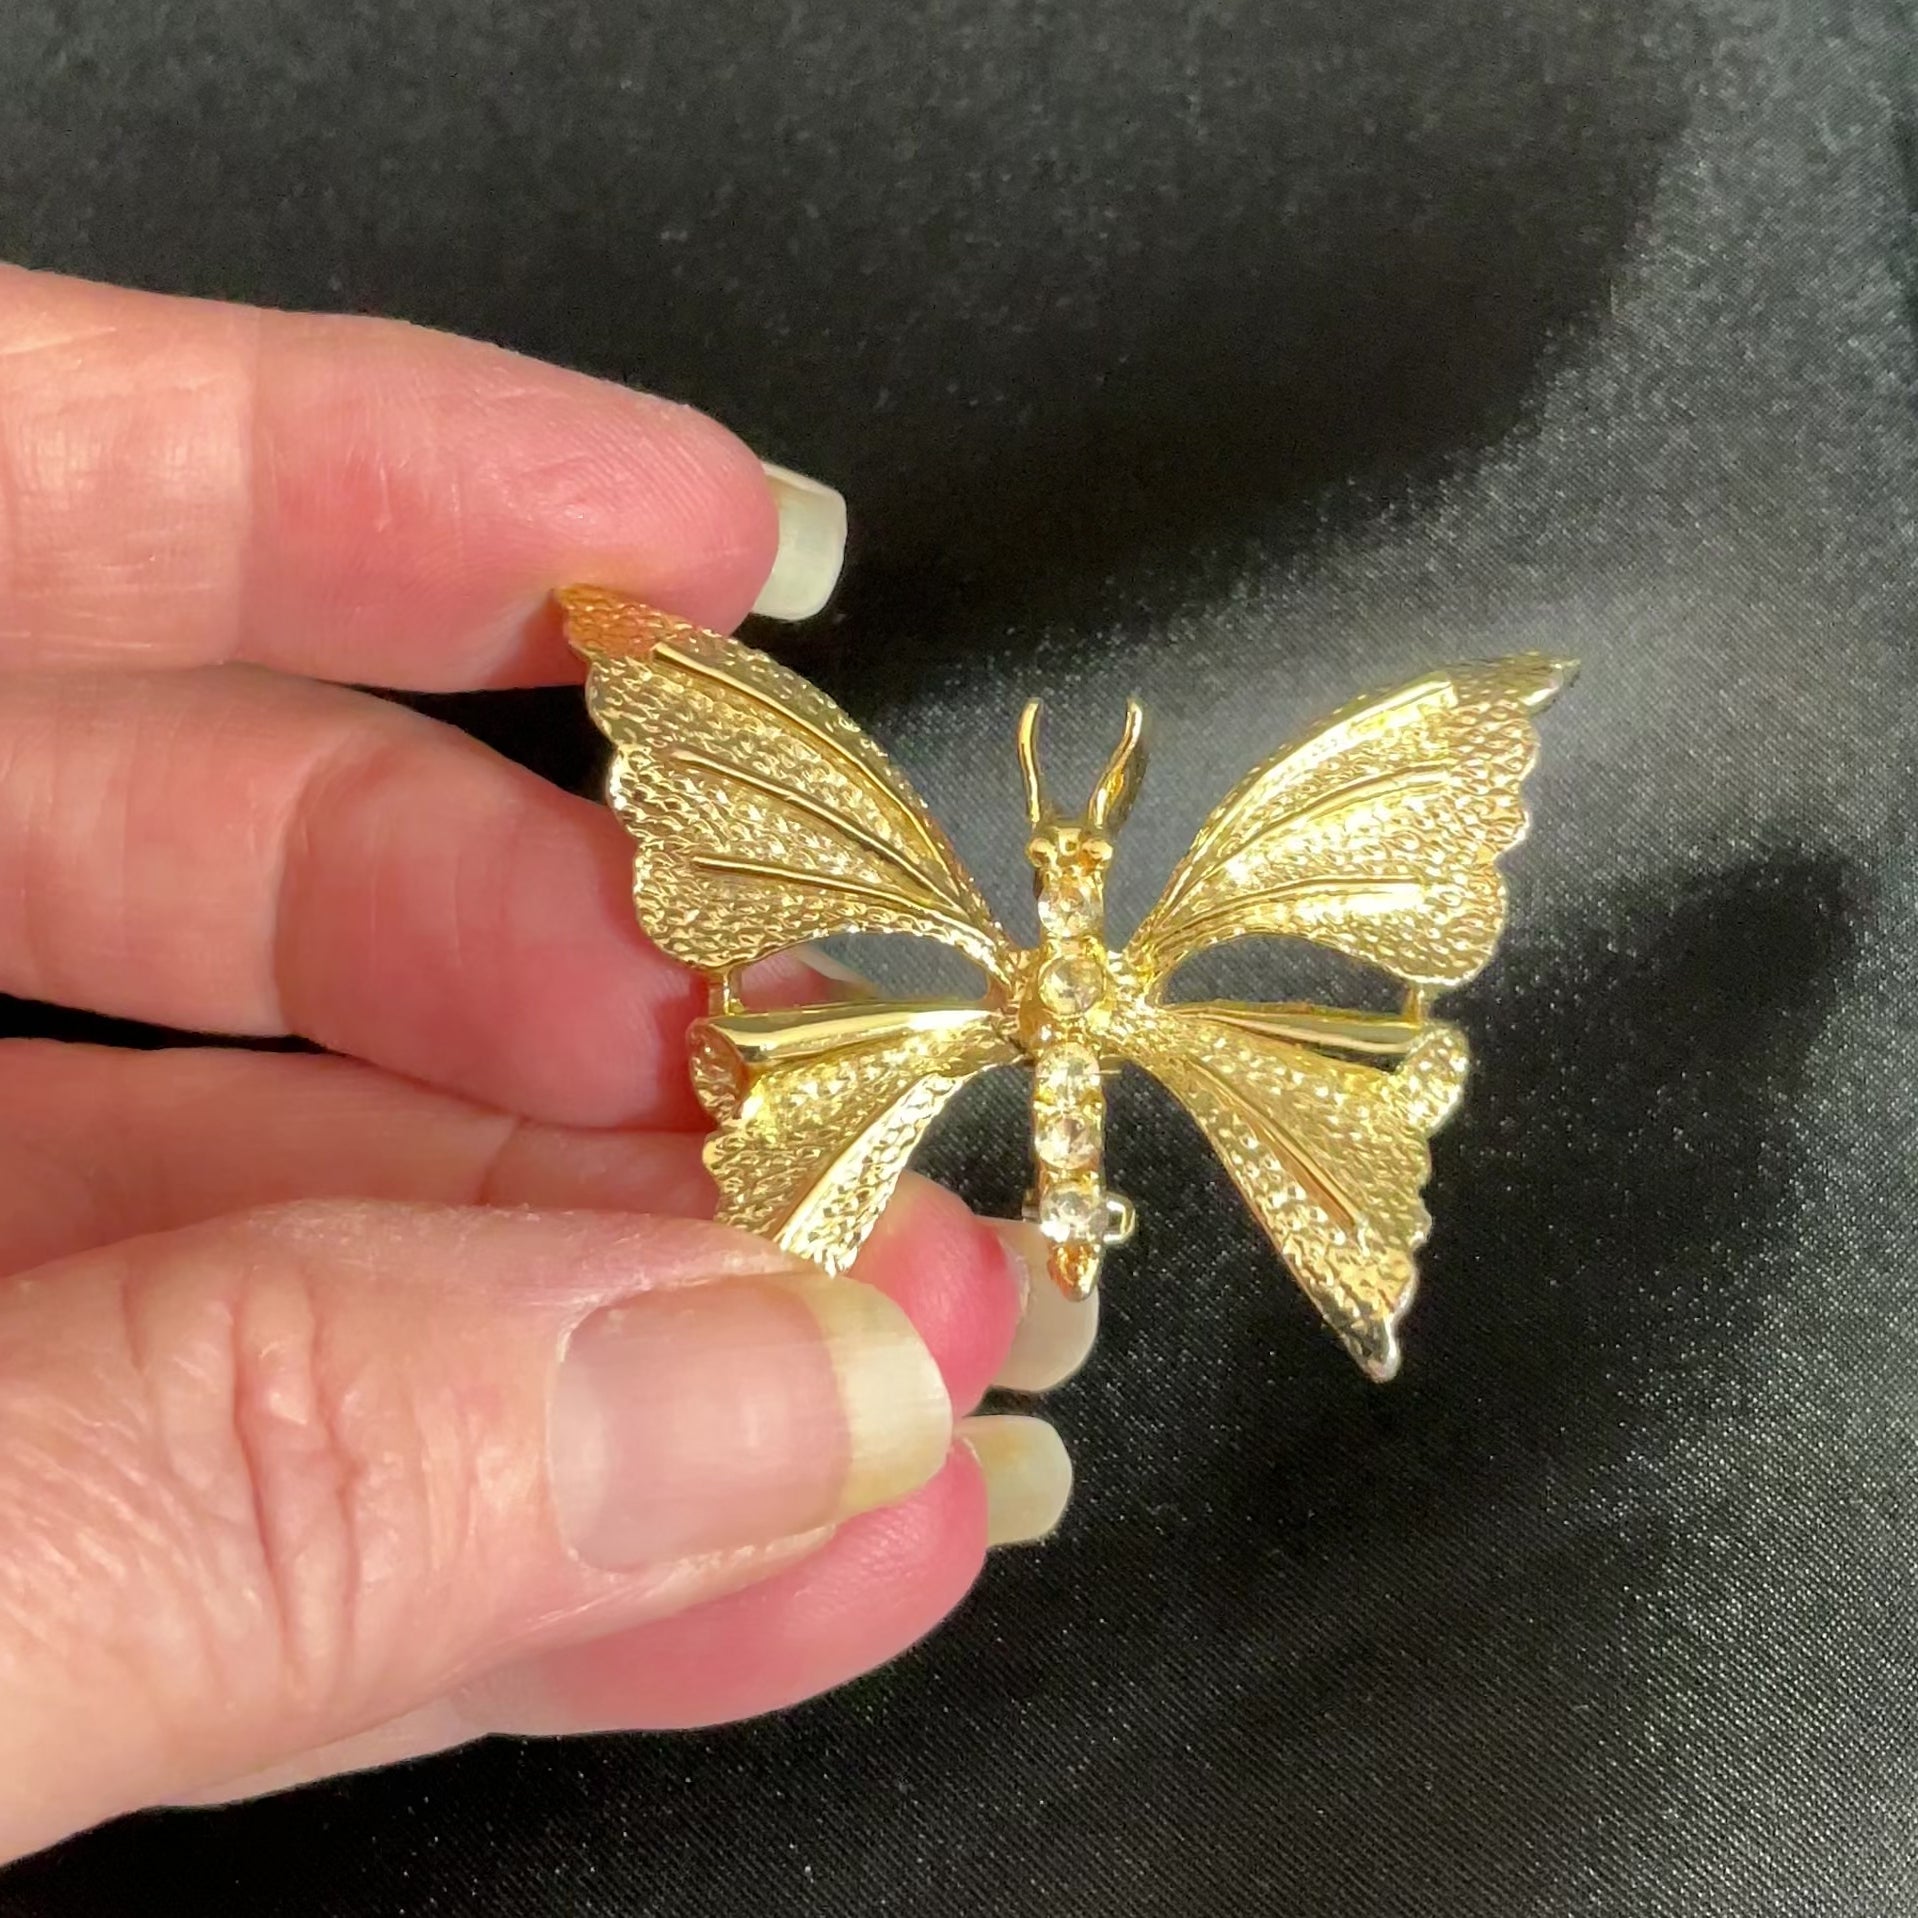 1970's Gerrys Vintage Rhinestone Butterfly Brooch Pin video showing how the rhinestones sparkle.